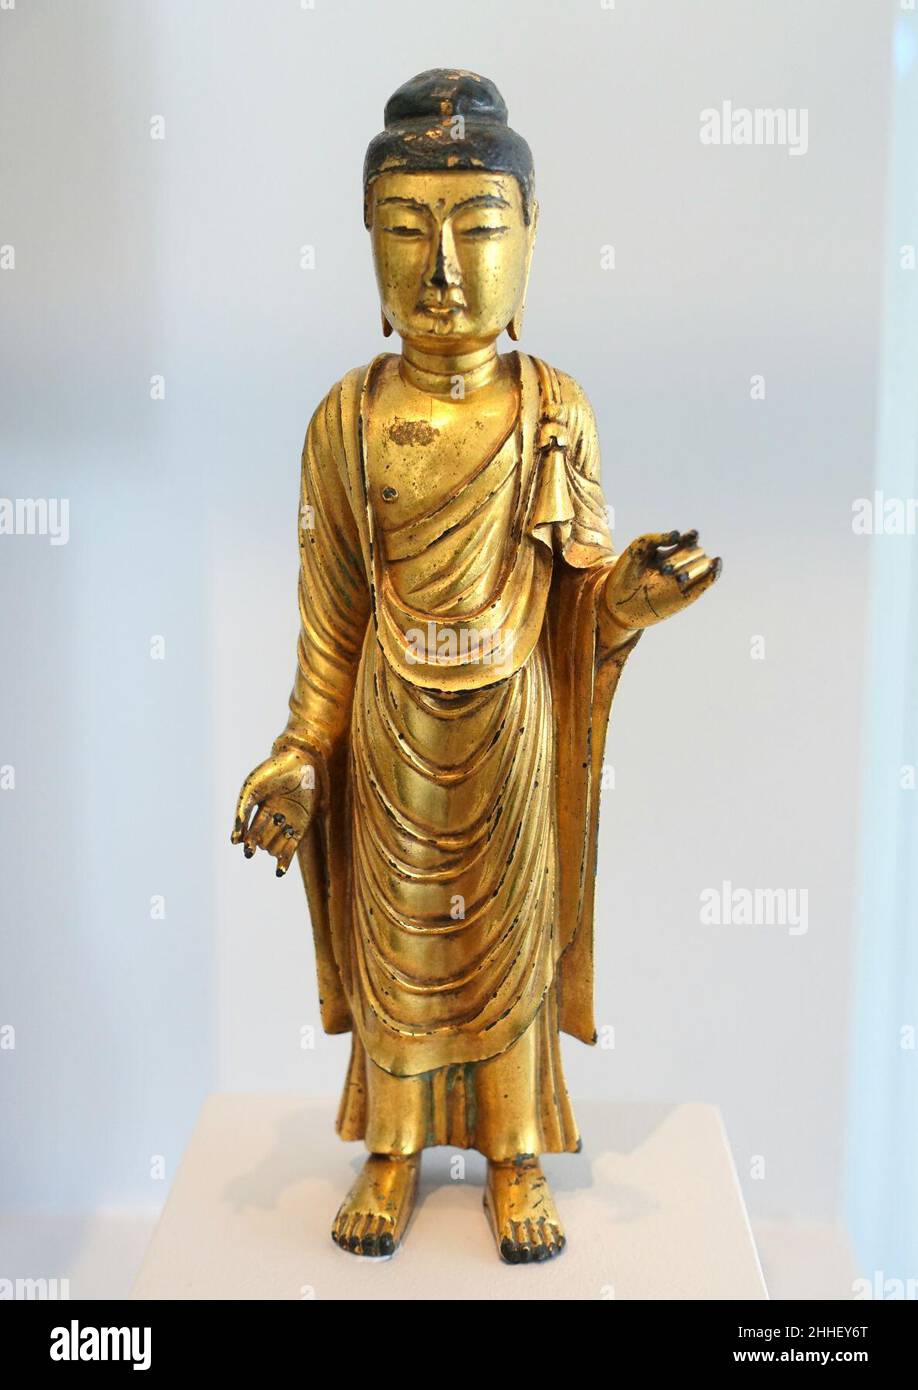 Standing Buddha with Right Hand Lowered and Left Hand Raised, Korea, Unified Silla dynasty, late 7th to early 8th century AD, gilt bronze Stock Photo